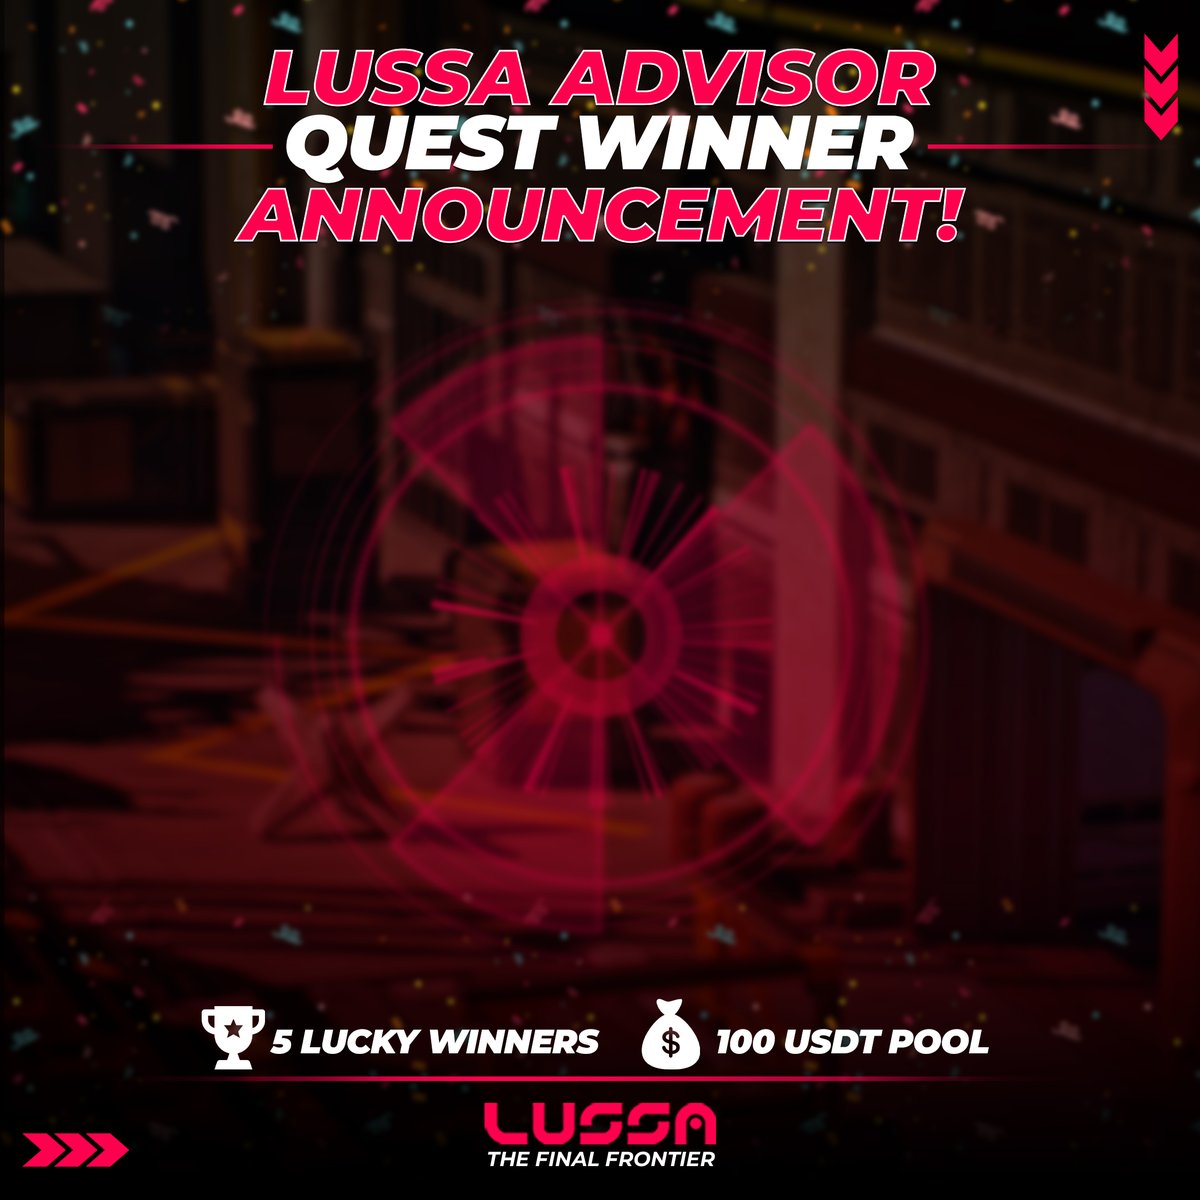 🎉 Applause all around! Our quiz masters have spoken! Kudos to the victorious gamers! @ameeginta @LureGuf @SanjuSamso10299 @chu_2u9 @bless_vick Please share the wallet address in the comment box 👇 #LUSSA #QuizTriumph